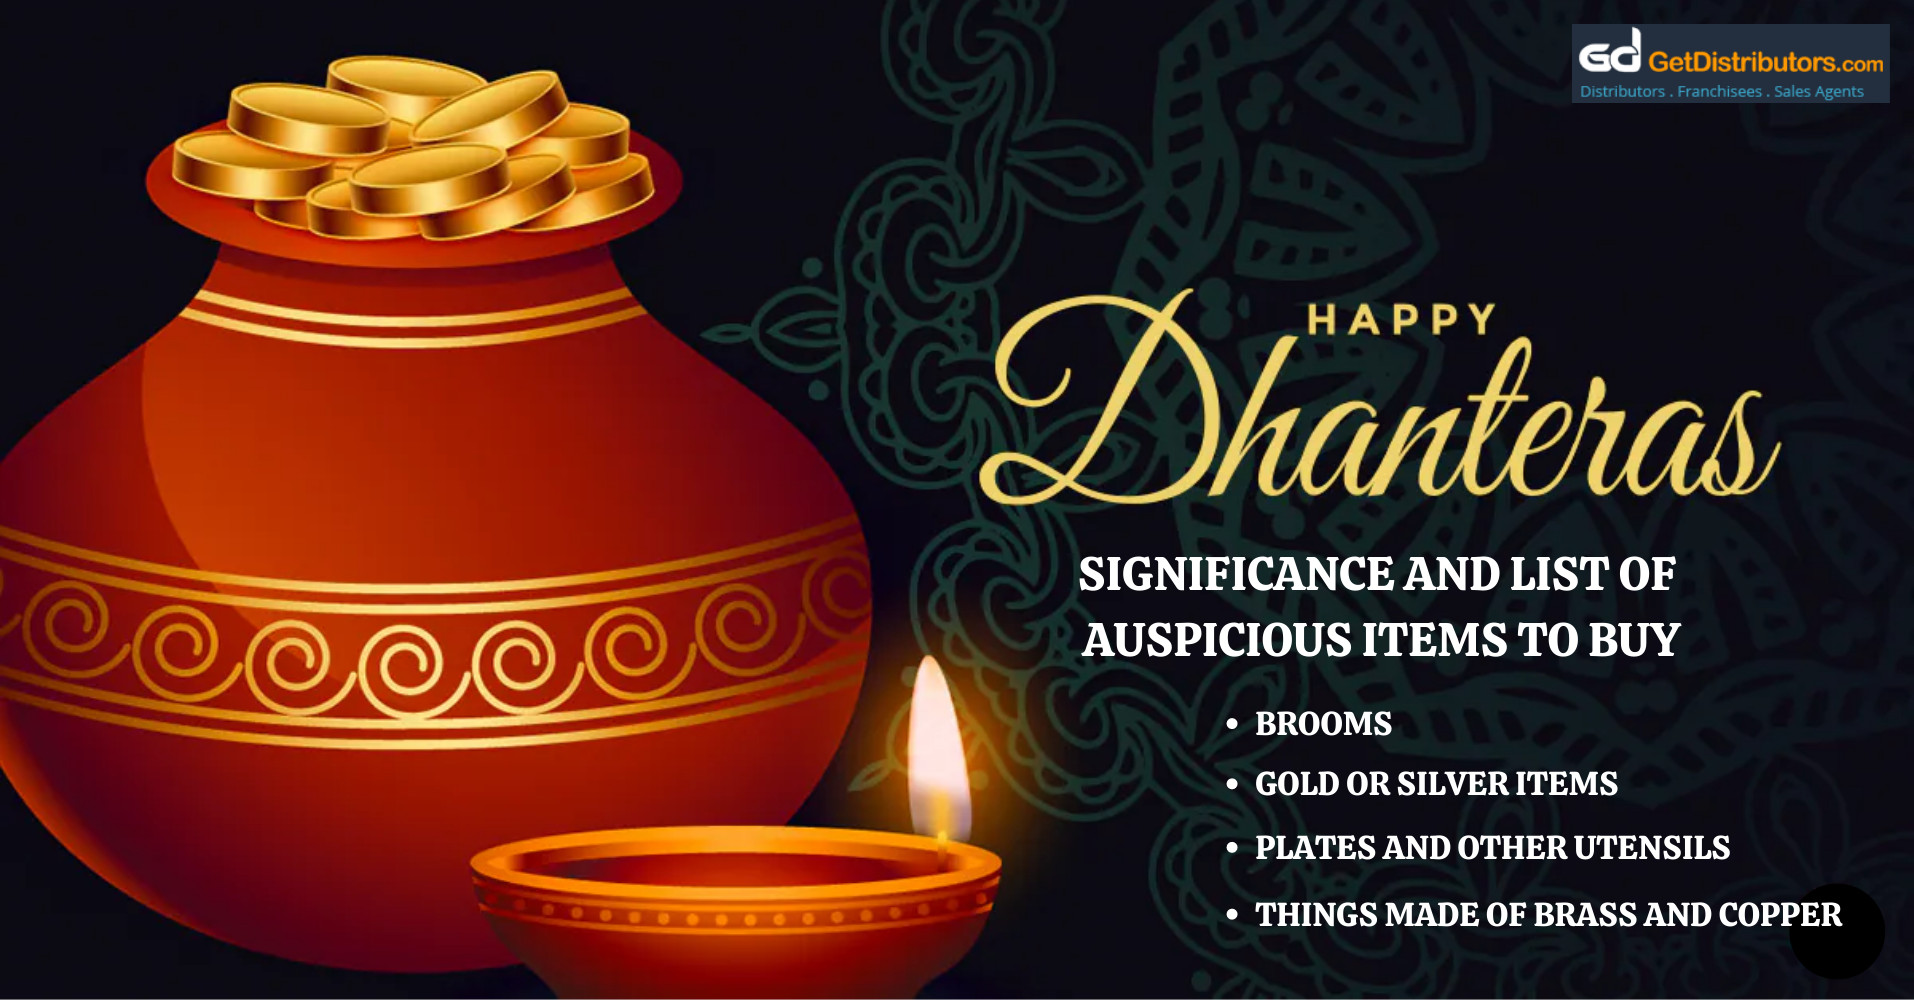 Dhanteras: Significance and list of auspicious items to buy